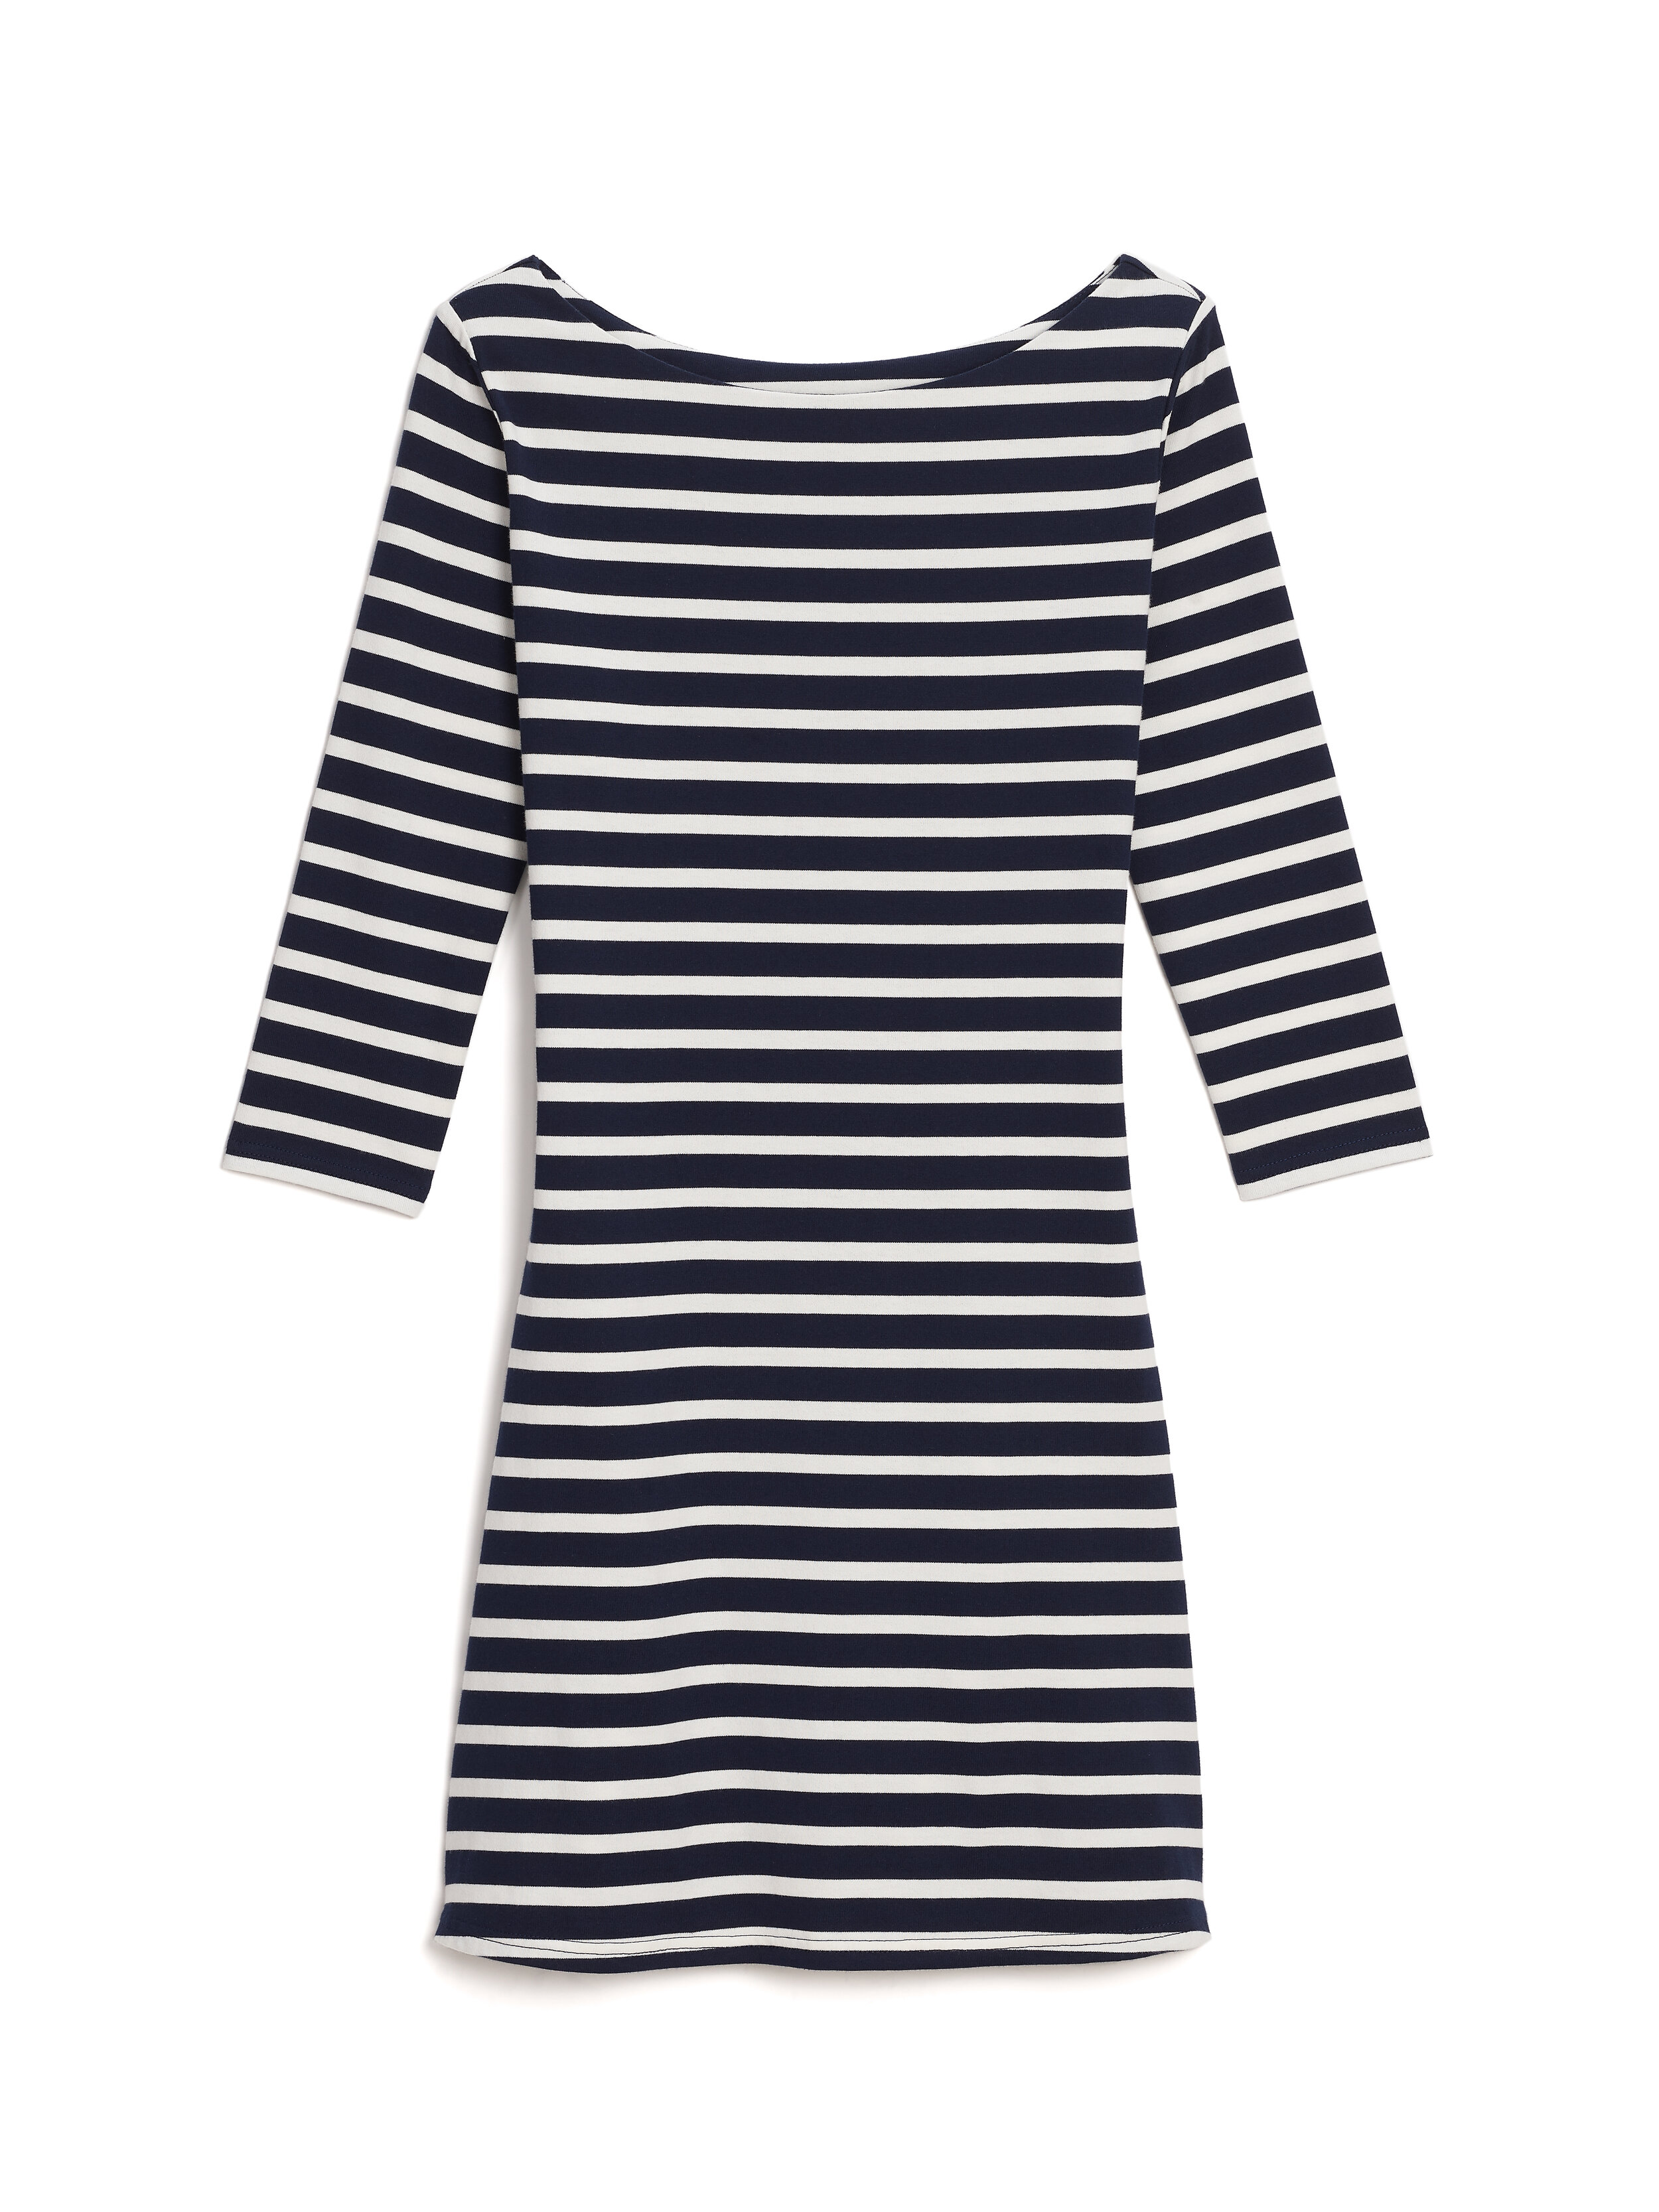 STRIPED_FIT-AND-FLARE_DRESS.jpg